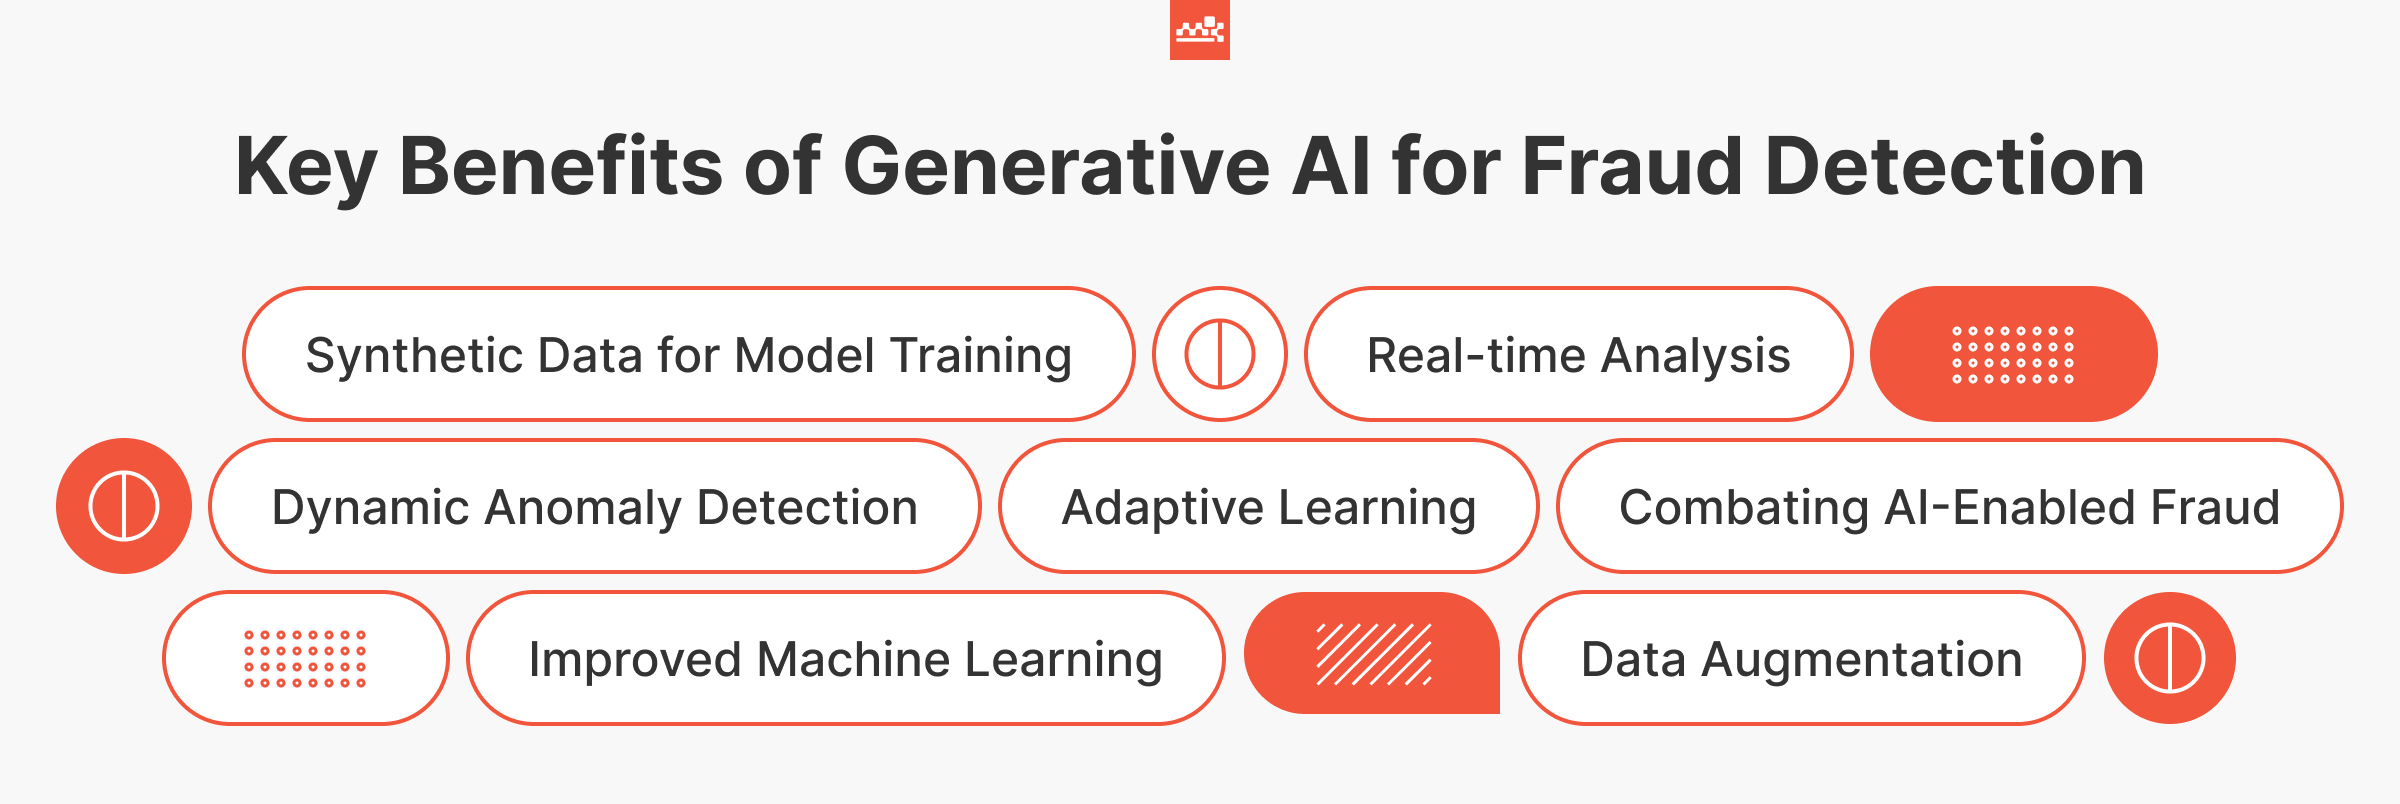 Key Benefits of Generative AI for Fraud Detection